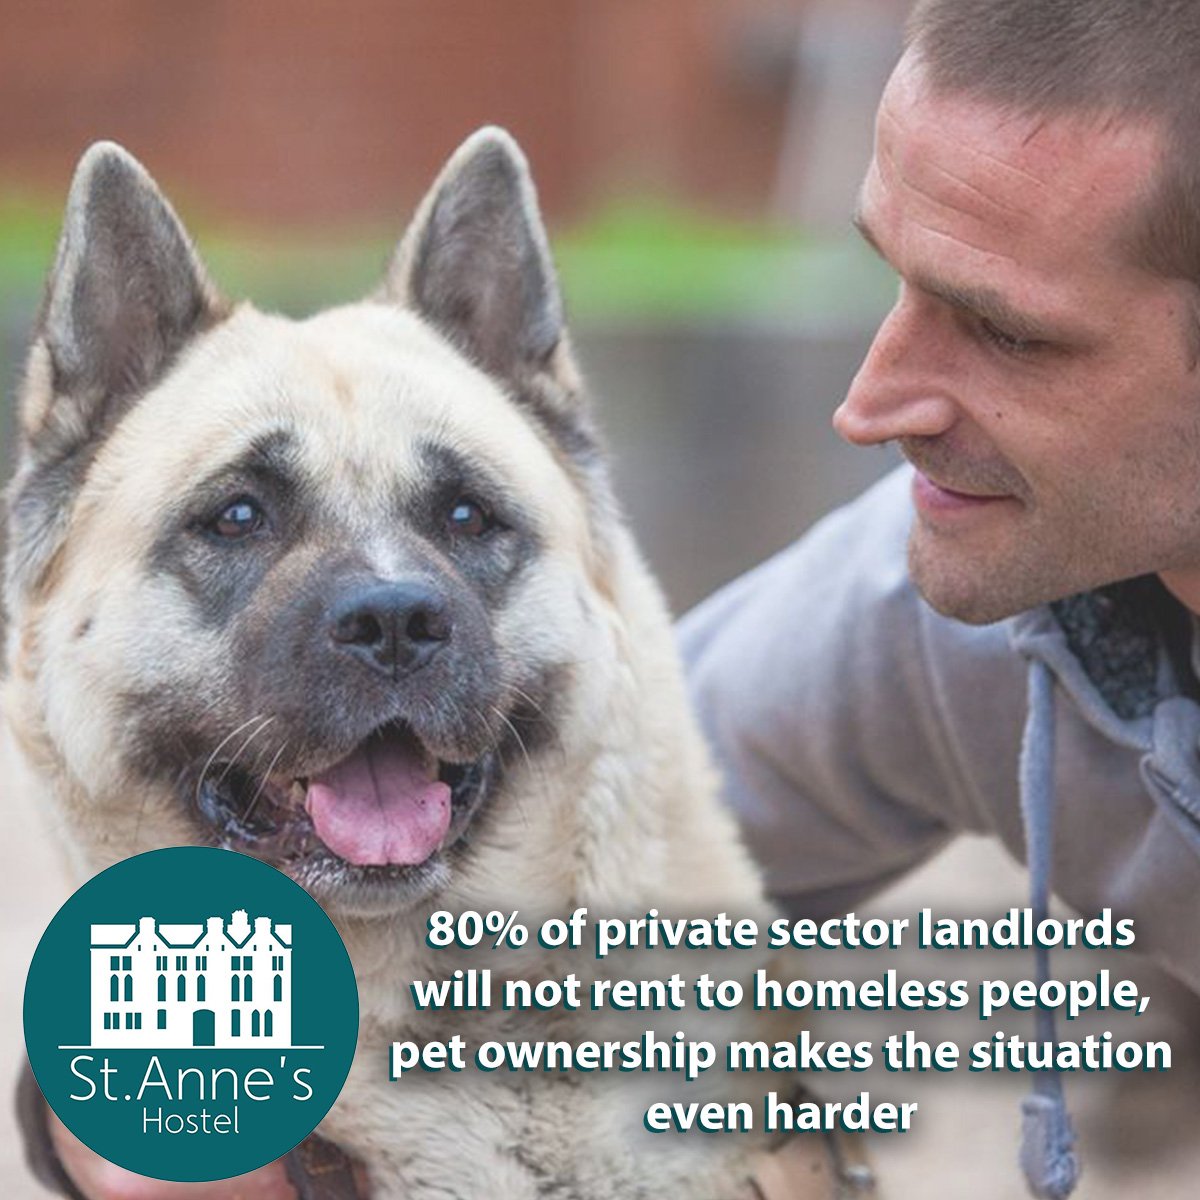 And this is why we are hiring a Landlord Liaison Officer! We're aiming to work directly with private landlords to help our residents move onto more permanent accommodation, without having to say goodbye to their much-loved dogs